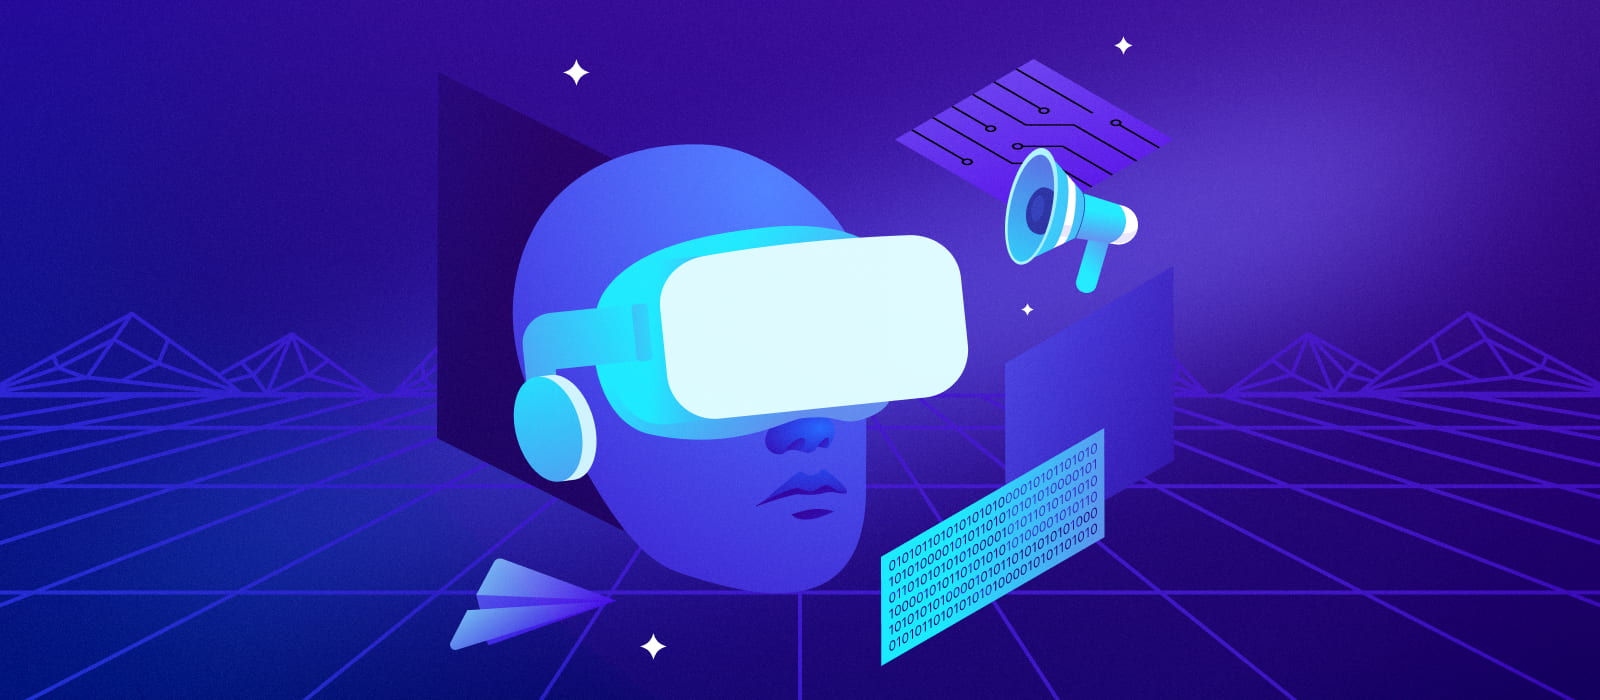 Marketing in the metaverse